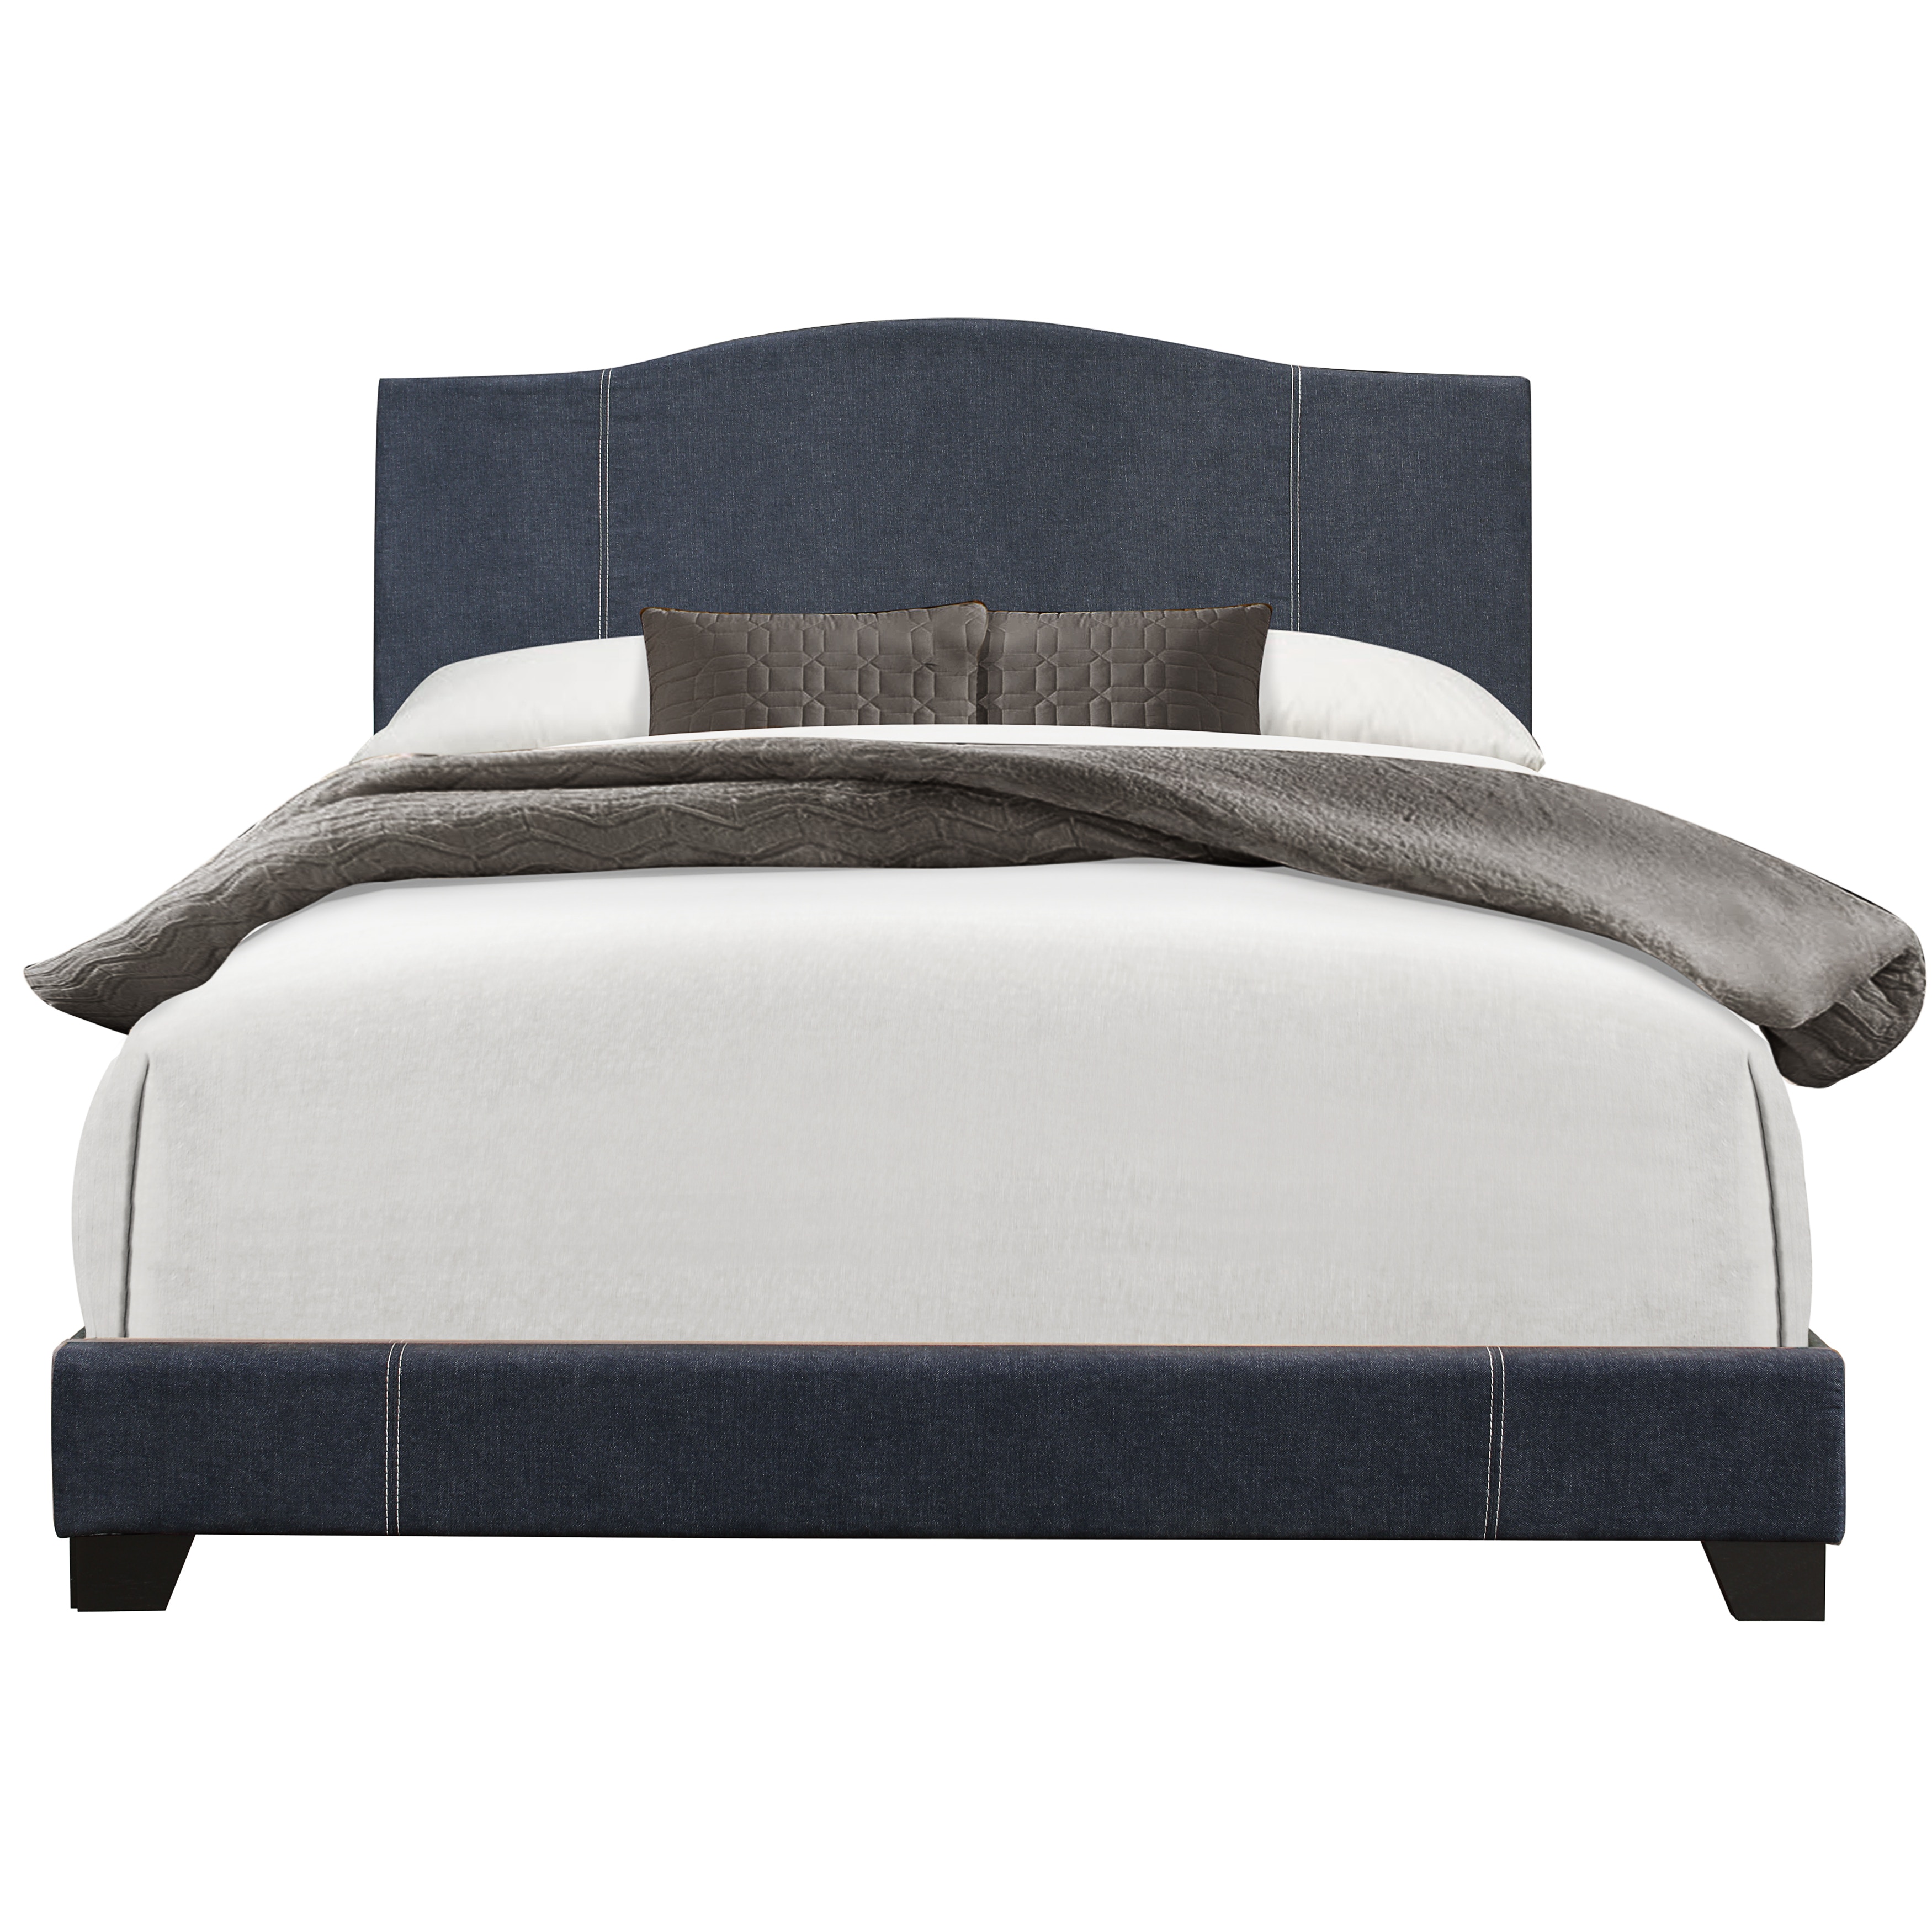 Queen All-In-One Modified Camel Back Upholstered Bed in Denim Cement